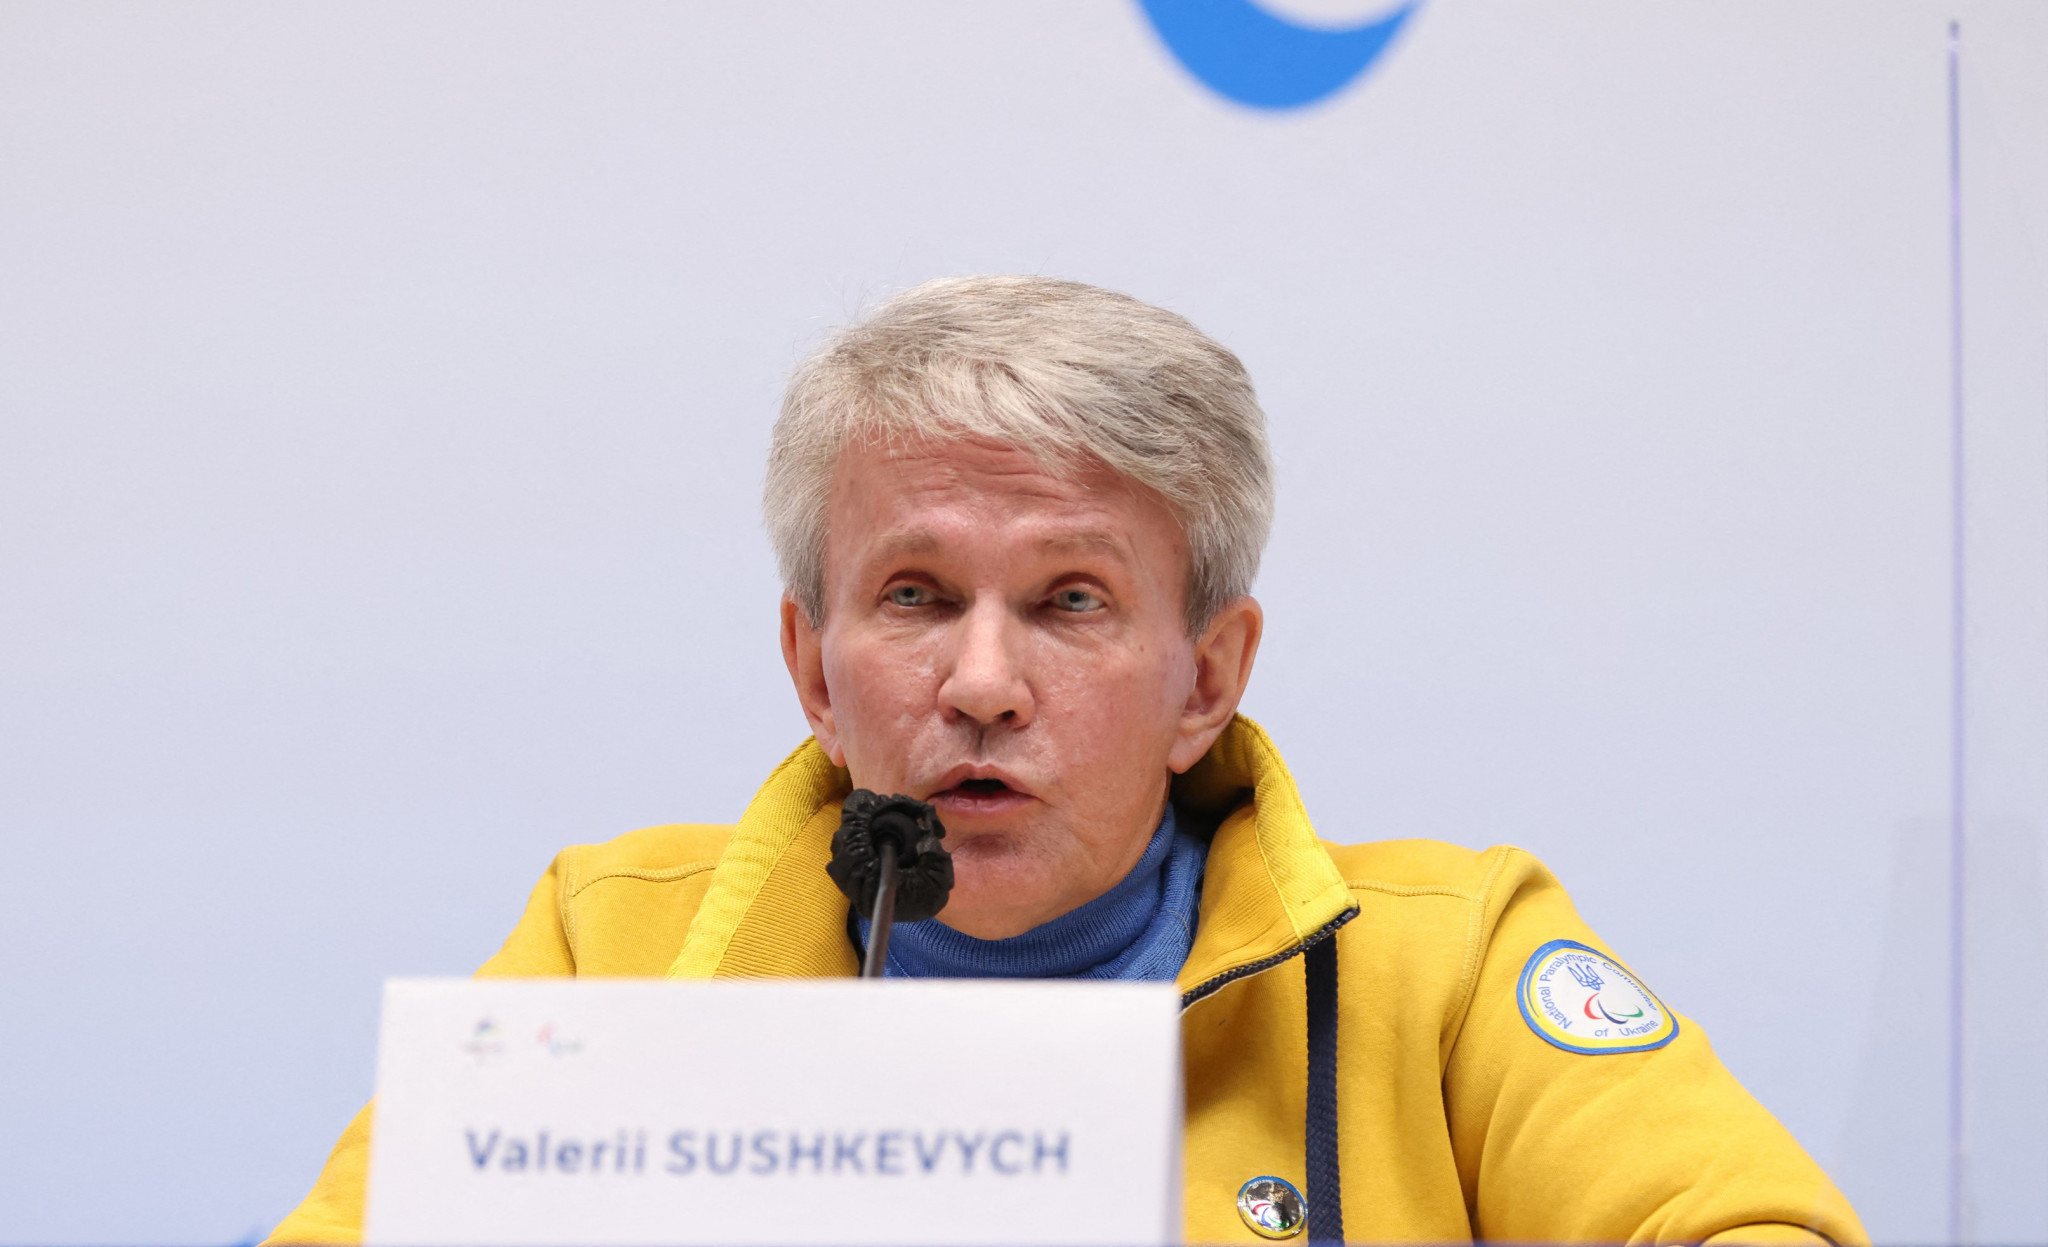 Valeriy Sushkevych is seeking for the EPC to call an Extraordinary General Assembly ©Getty Images